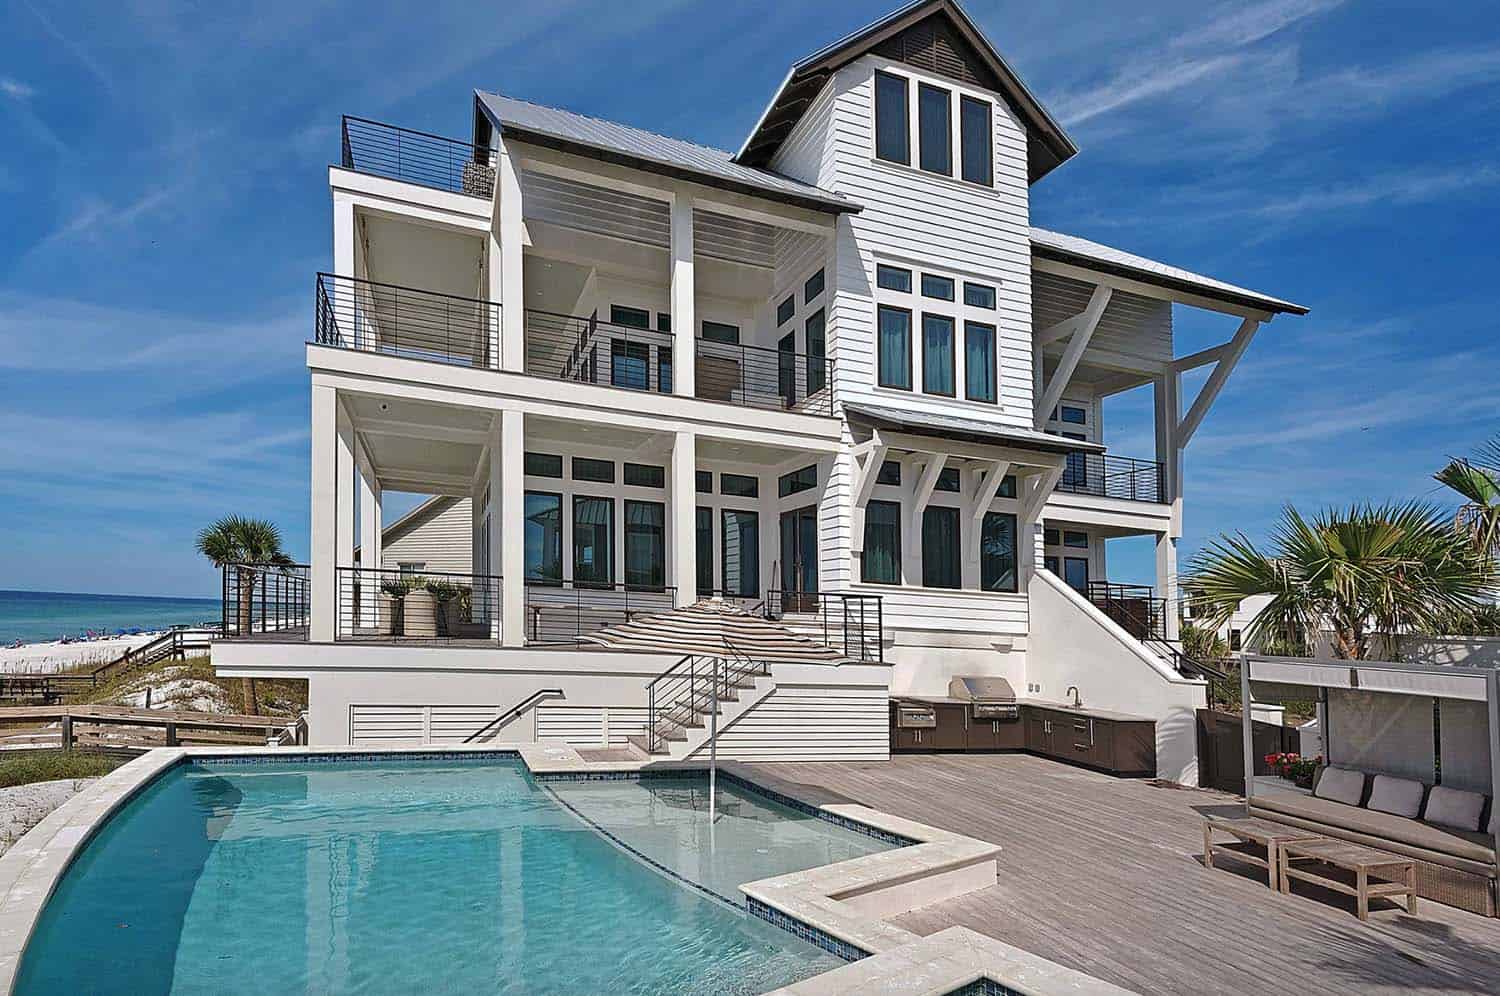 Seaside cottage with stylish details in Santa Rosa Beach, Florida